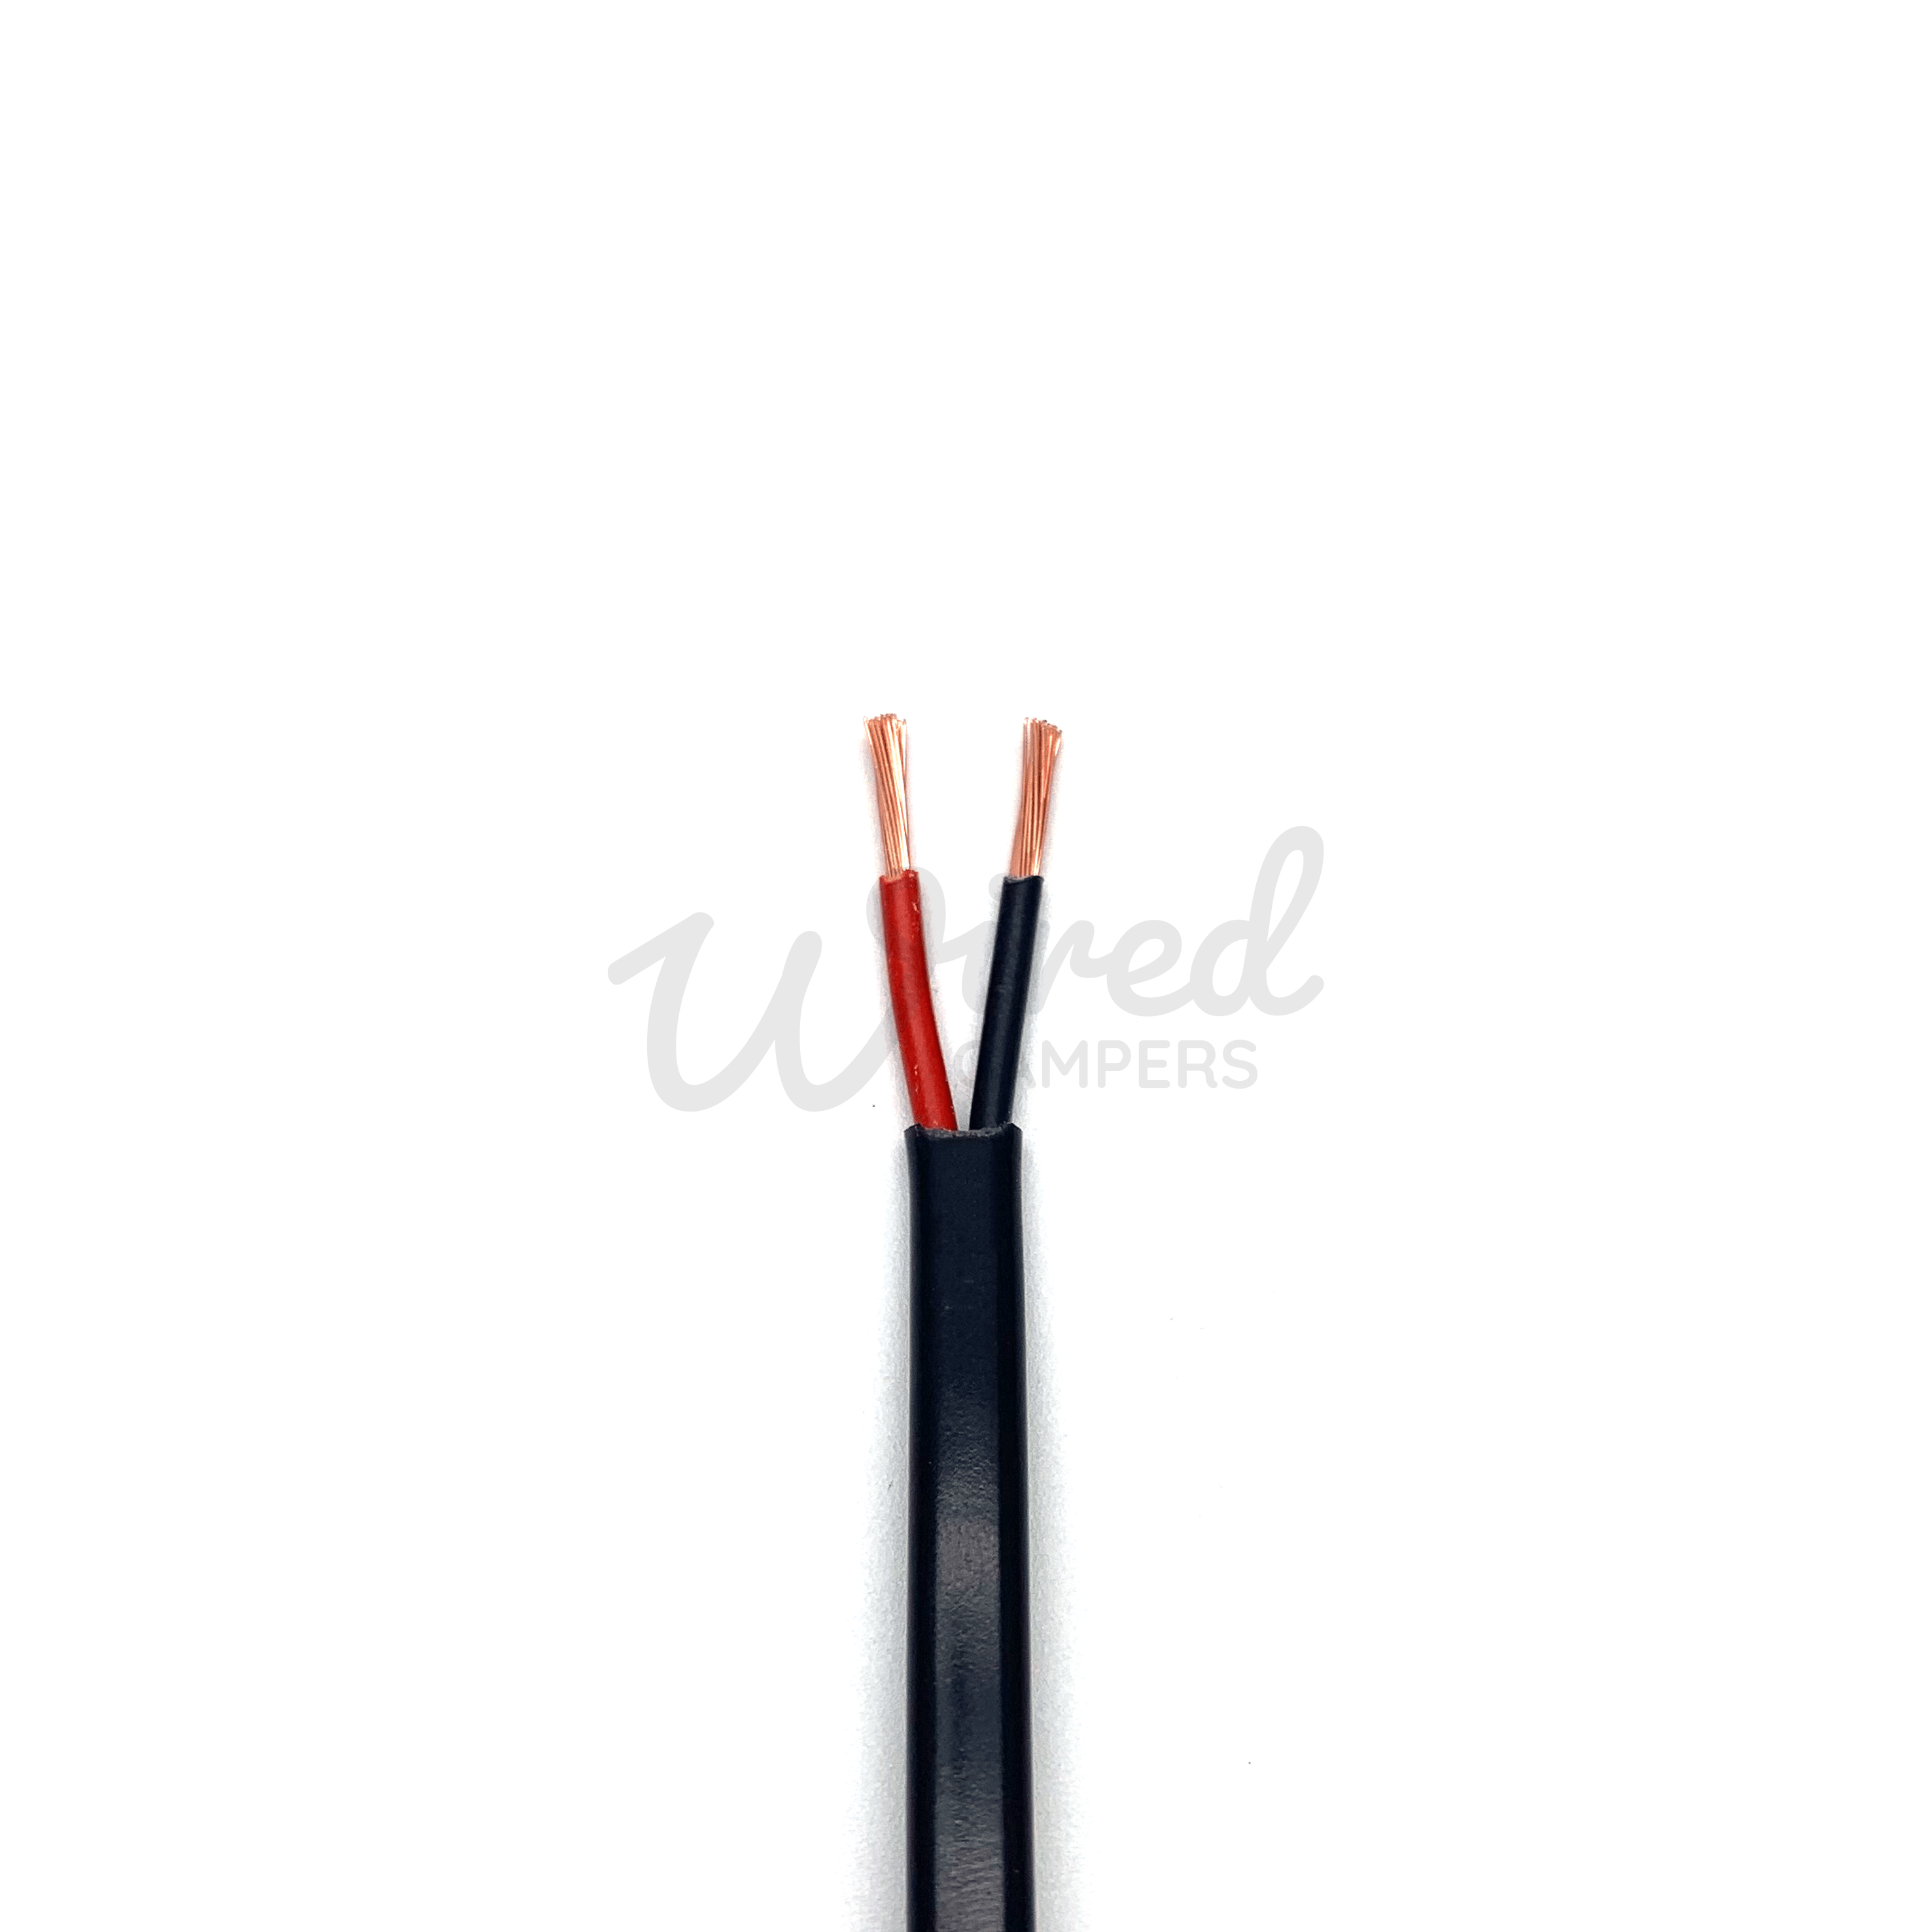 Wired Campers Limited 20M - 2.0mm2 25A Thin Wall Twin Core Flat Automotive Camper Cable